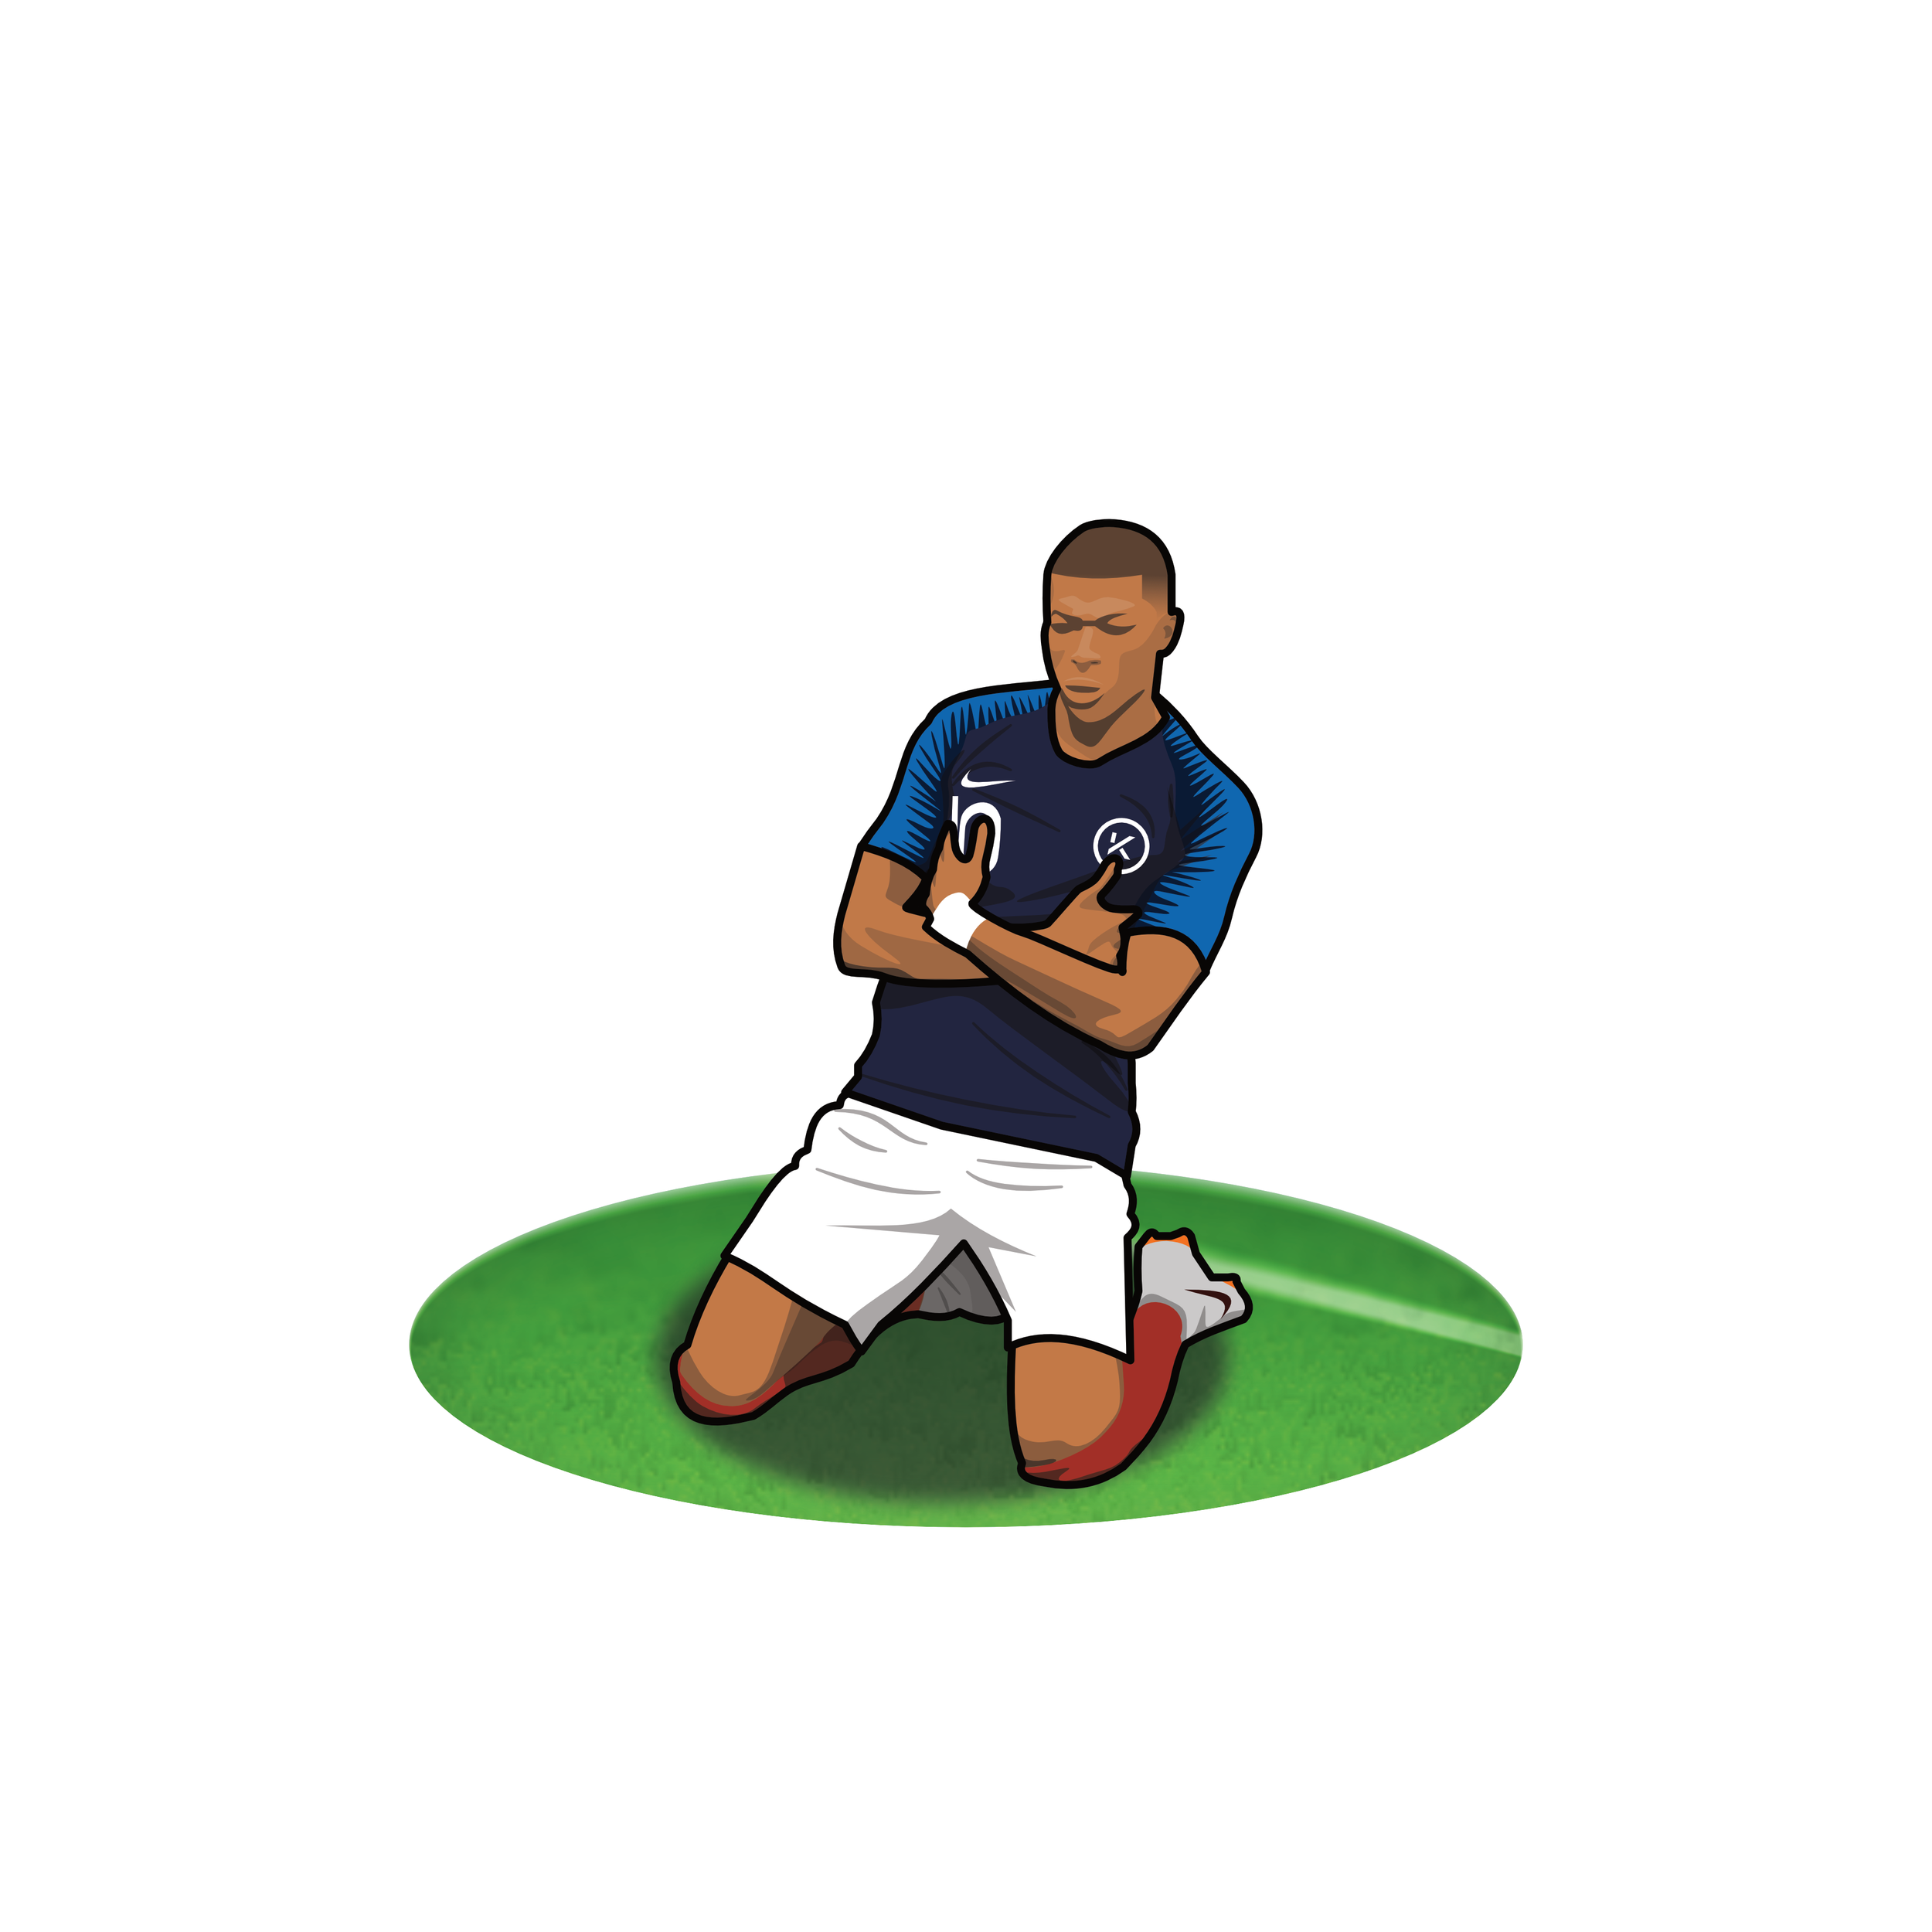 Mbappe Square.png